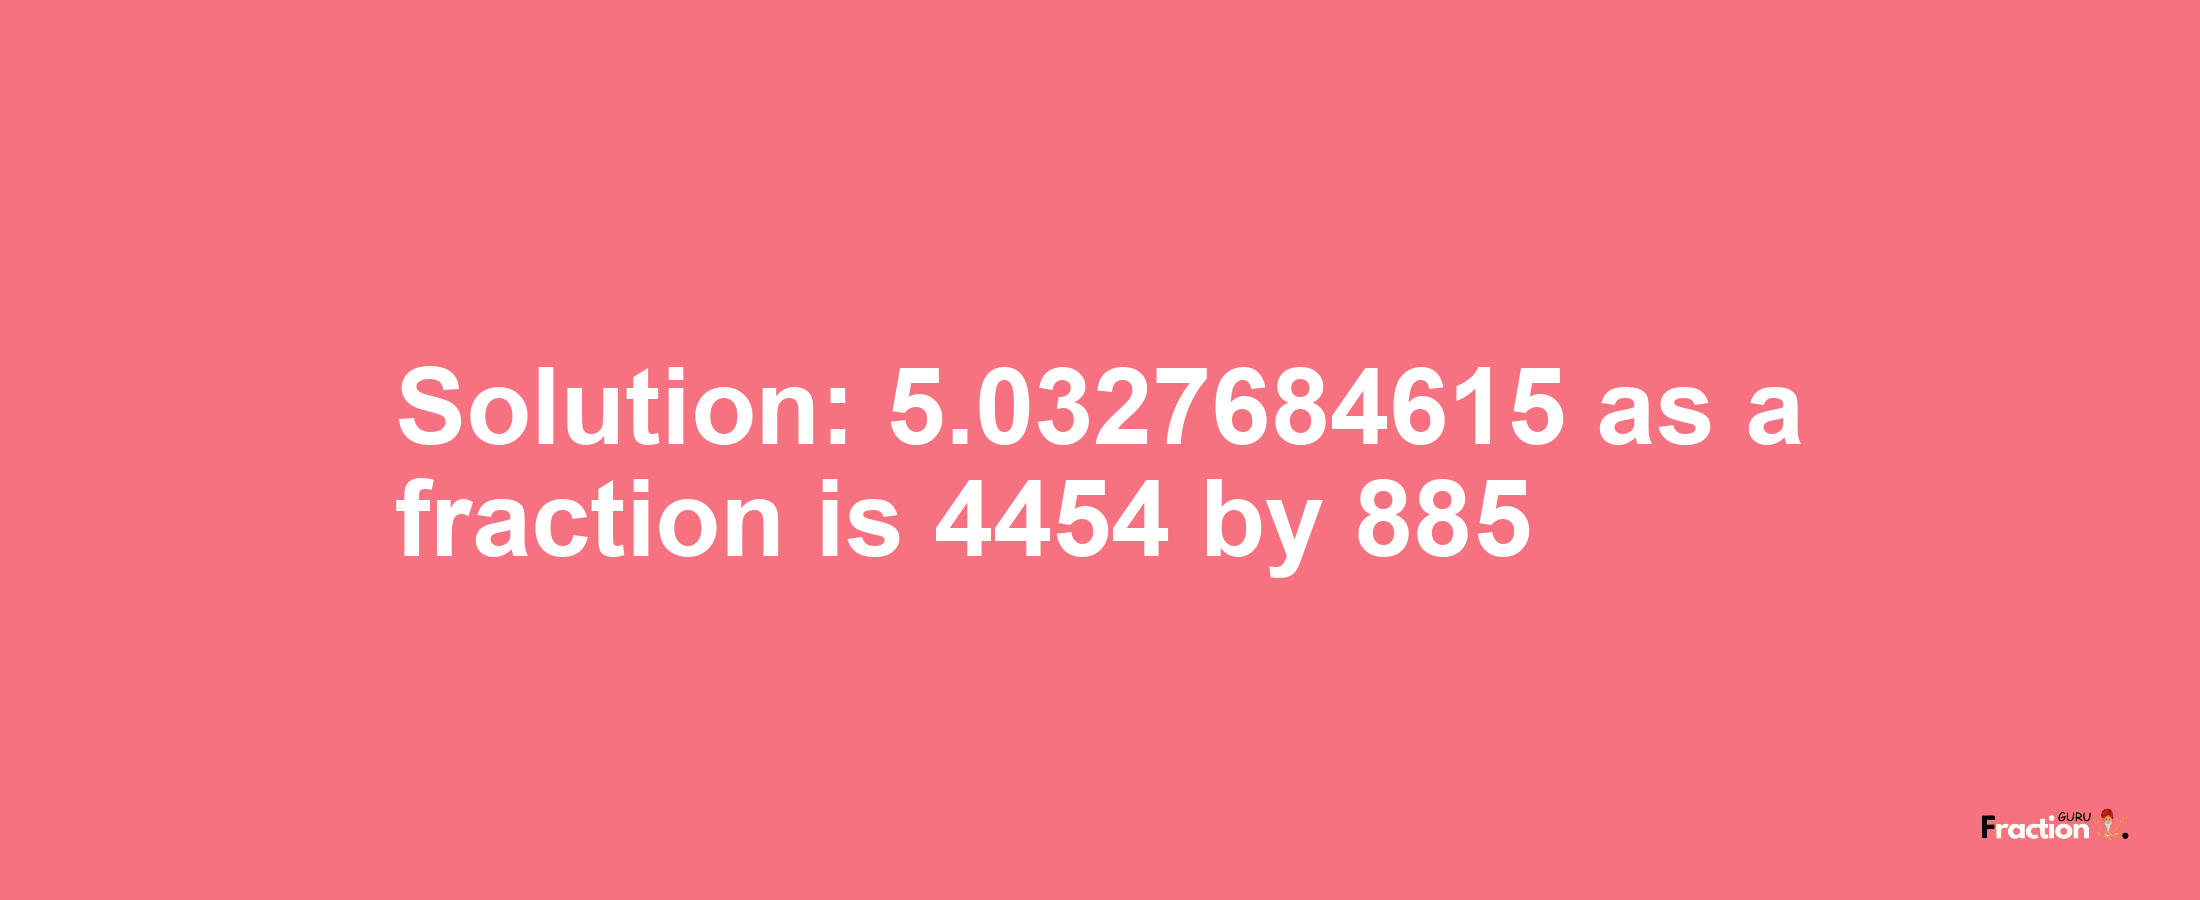 Solution:5.0327684615 as a fraction is 4454/885